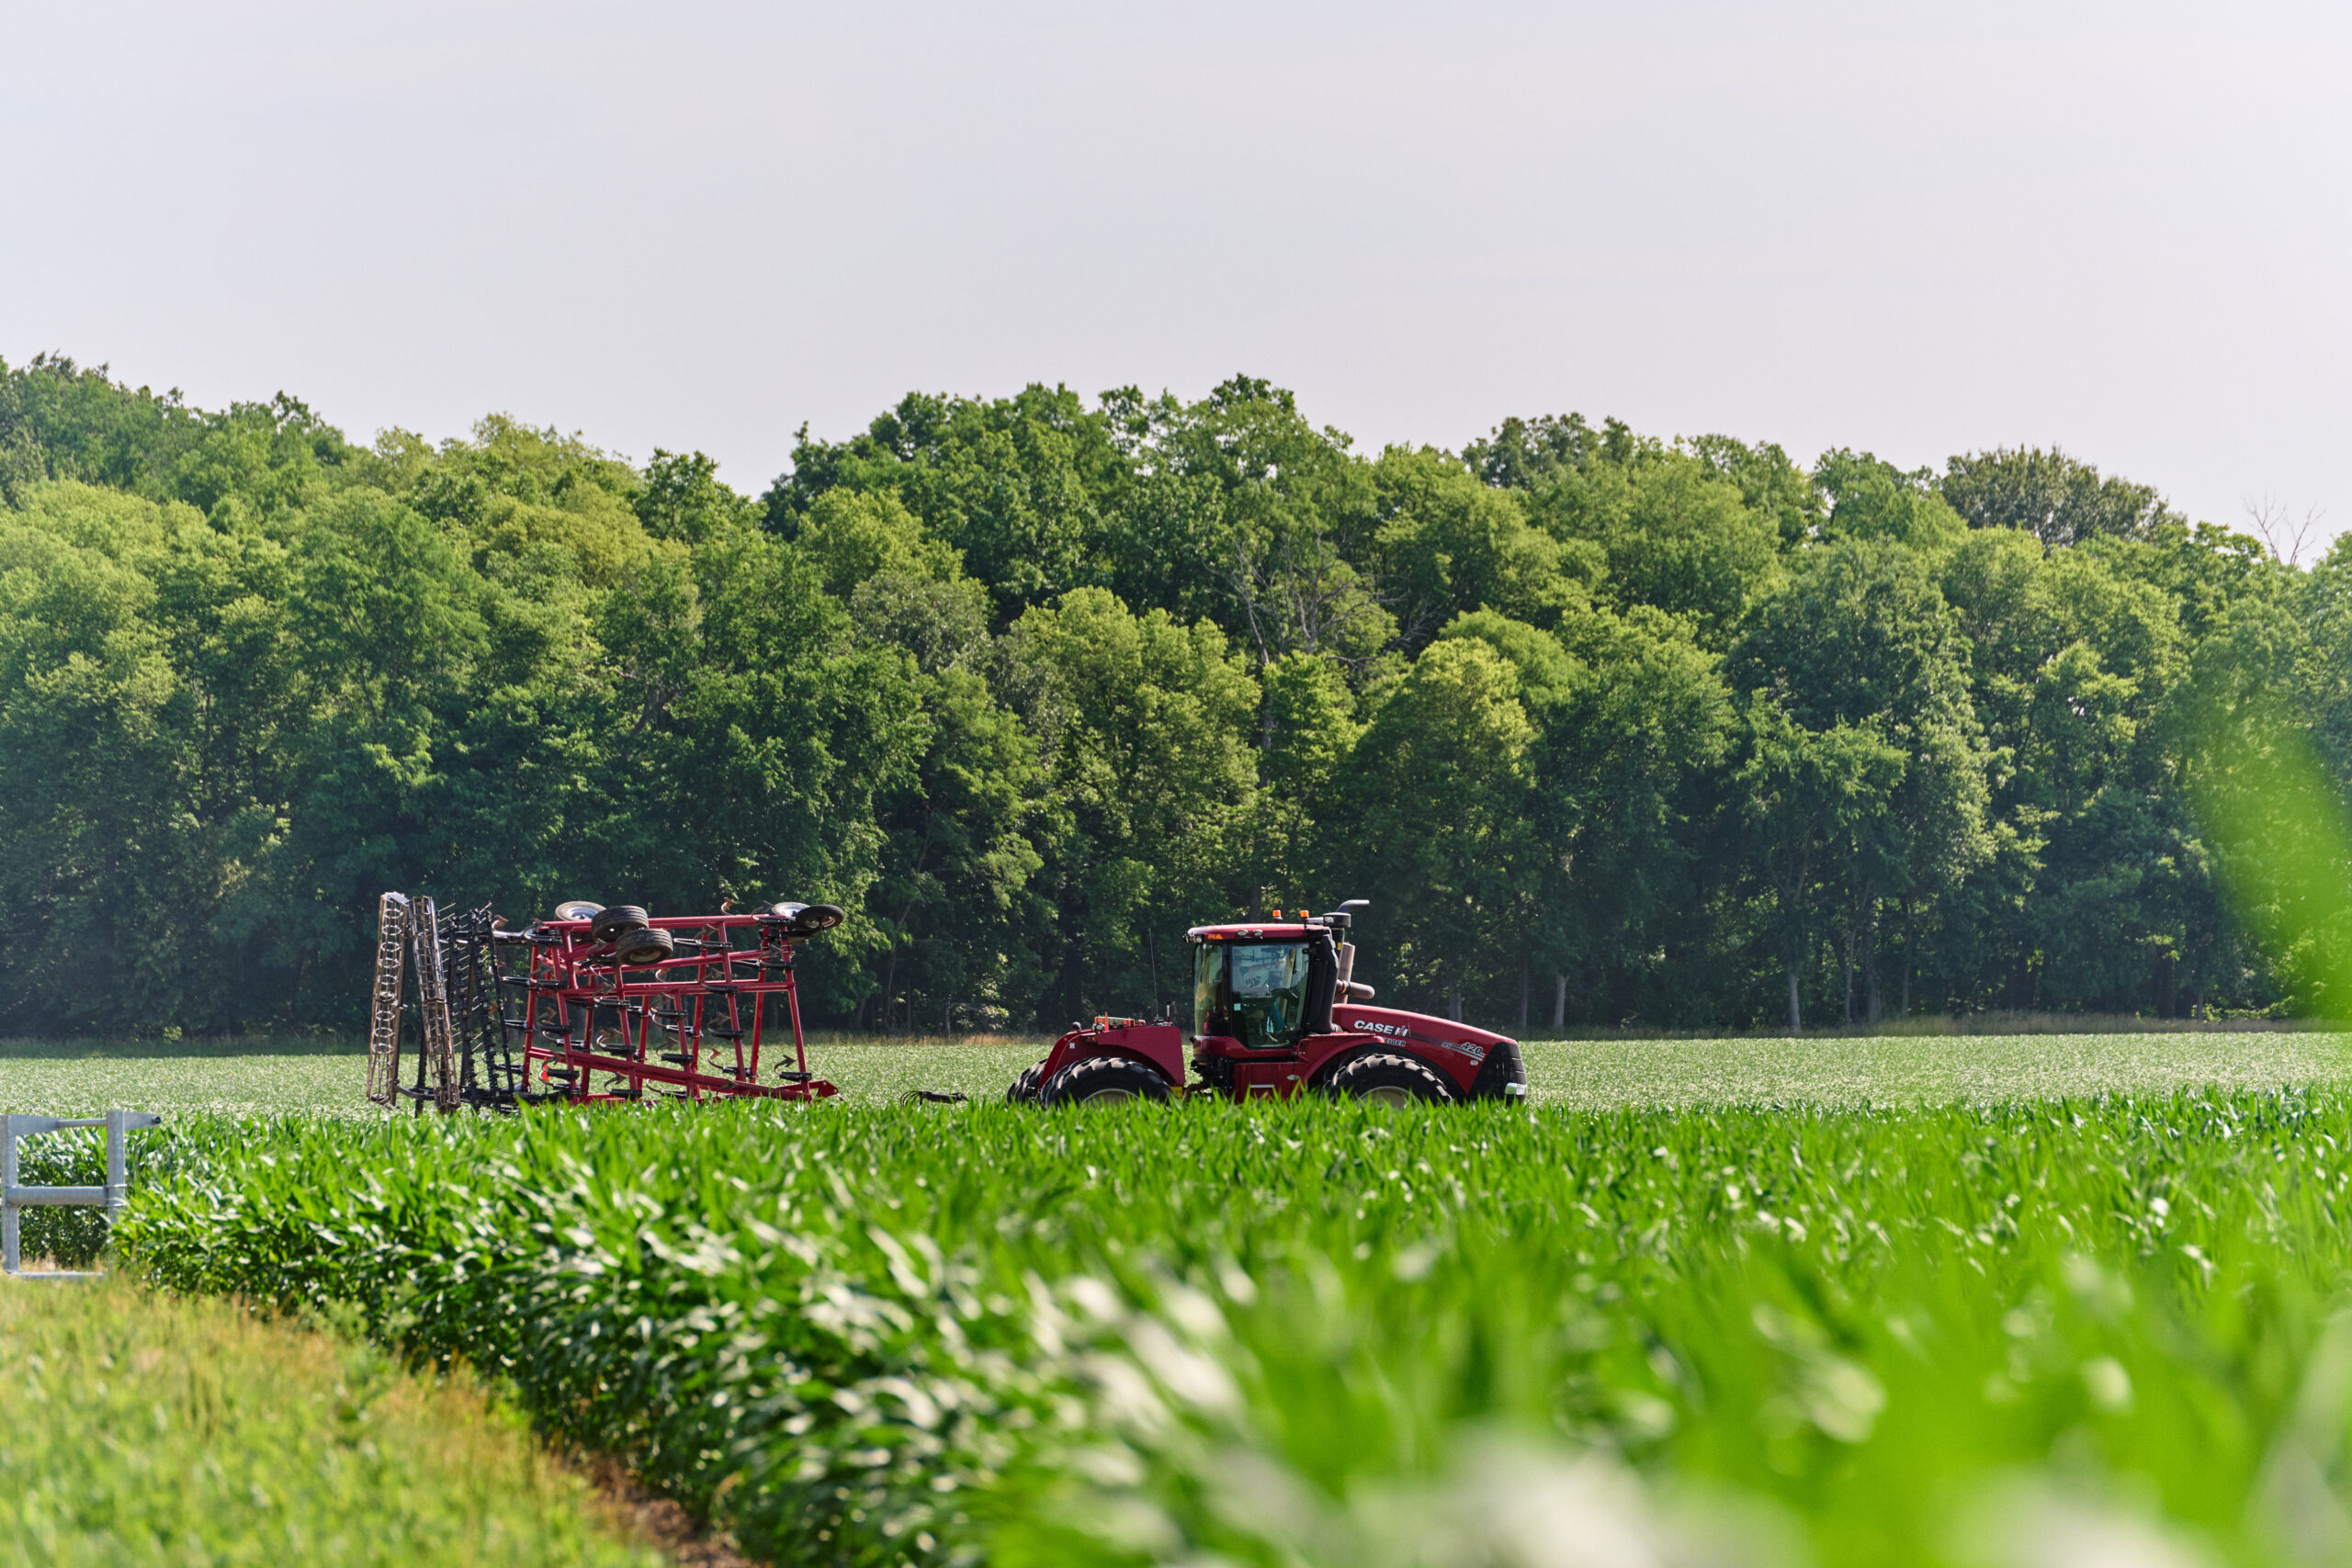 More than a nutrient: Nitrogen fertilizers and sustainable food systems